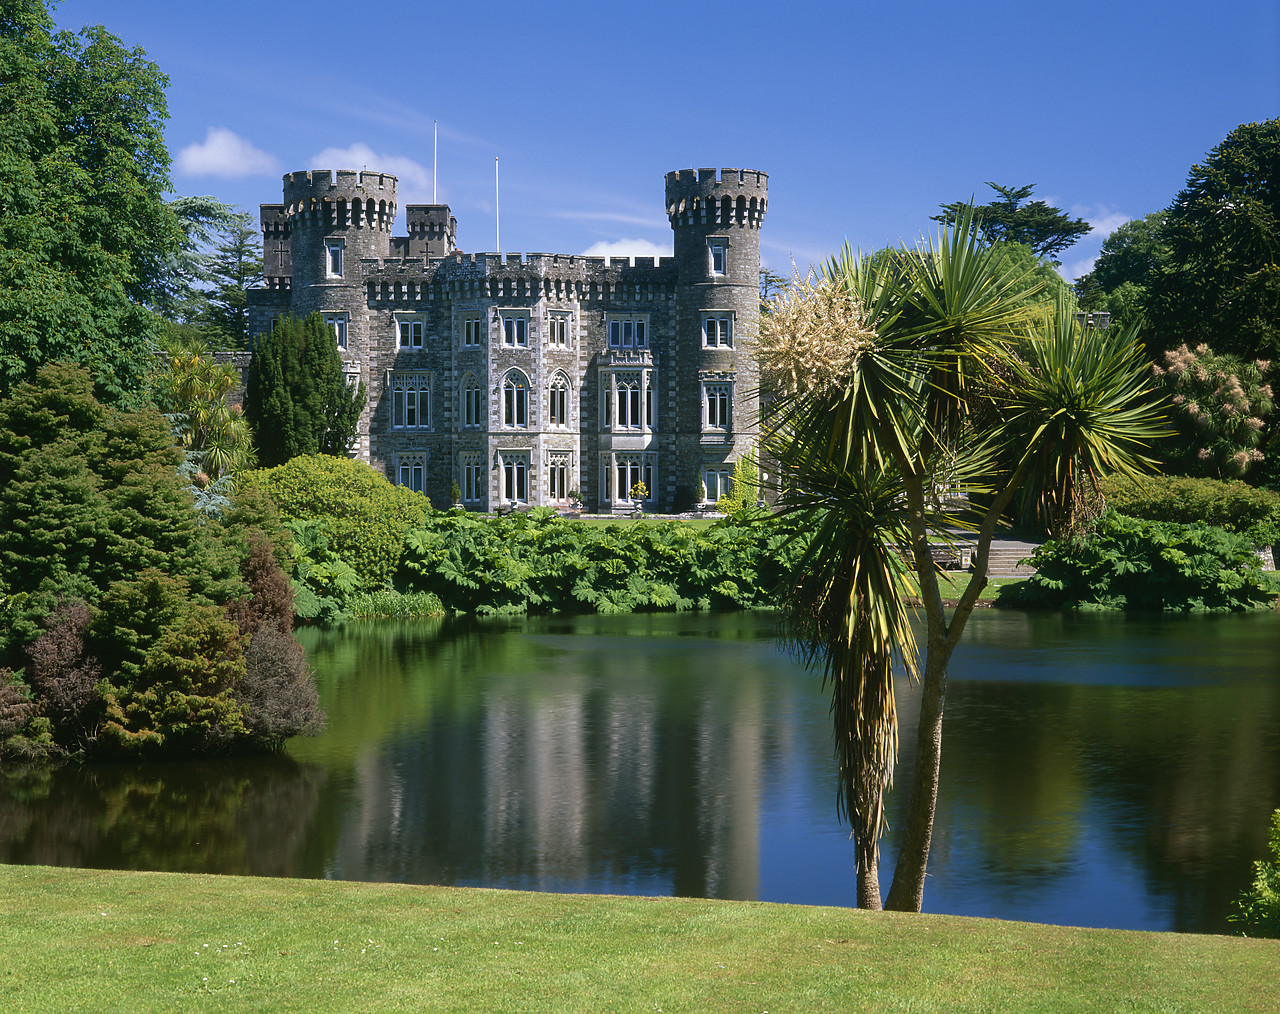 #990160-2 - Johnstown Castle, Co. Wexford, Southern Ireland